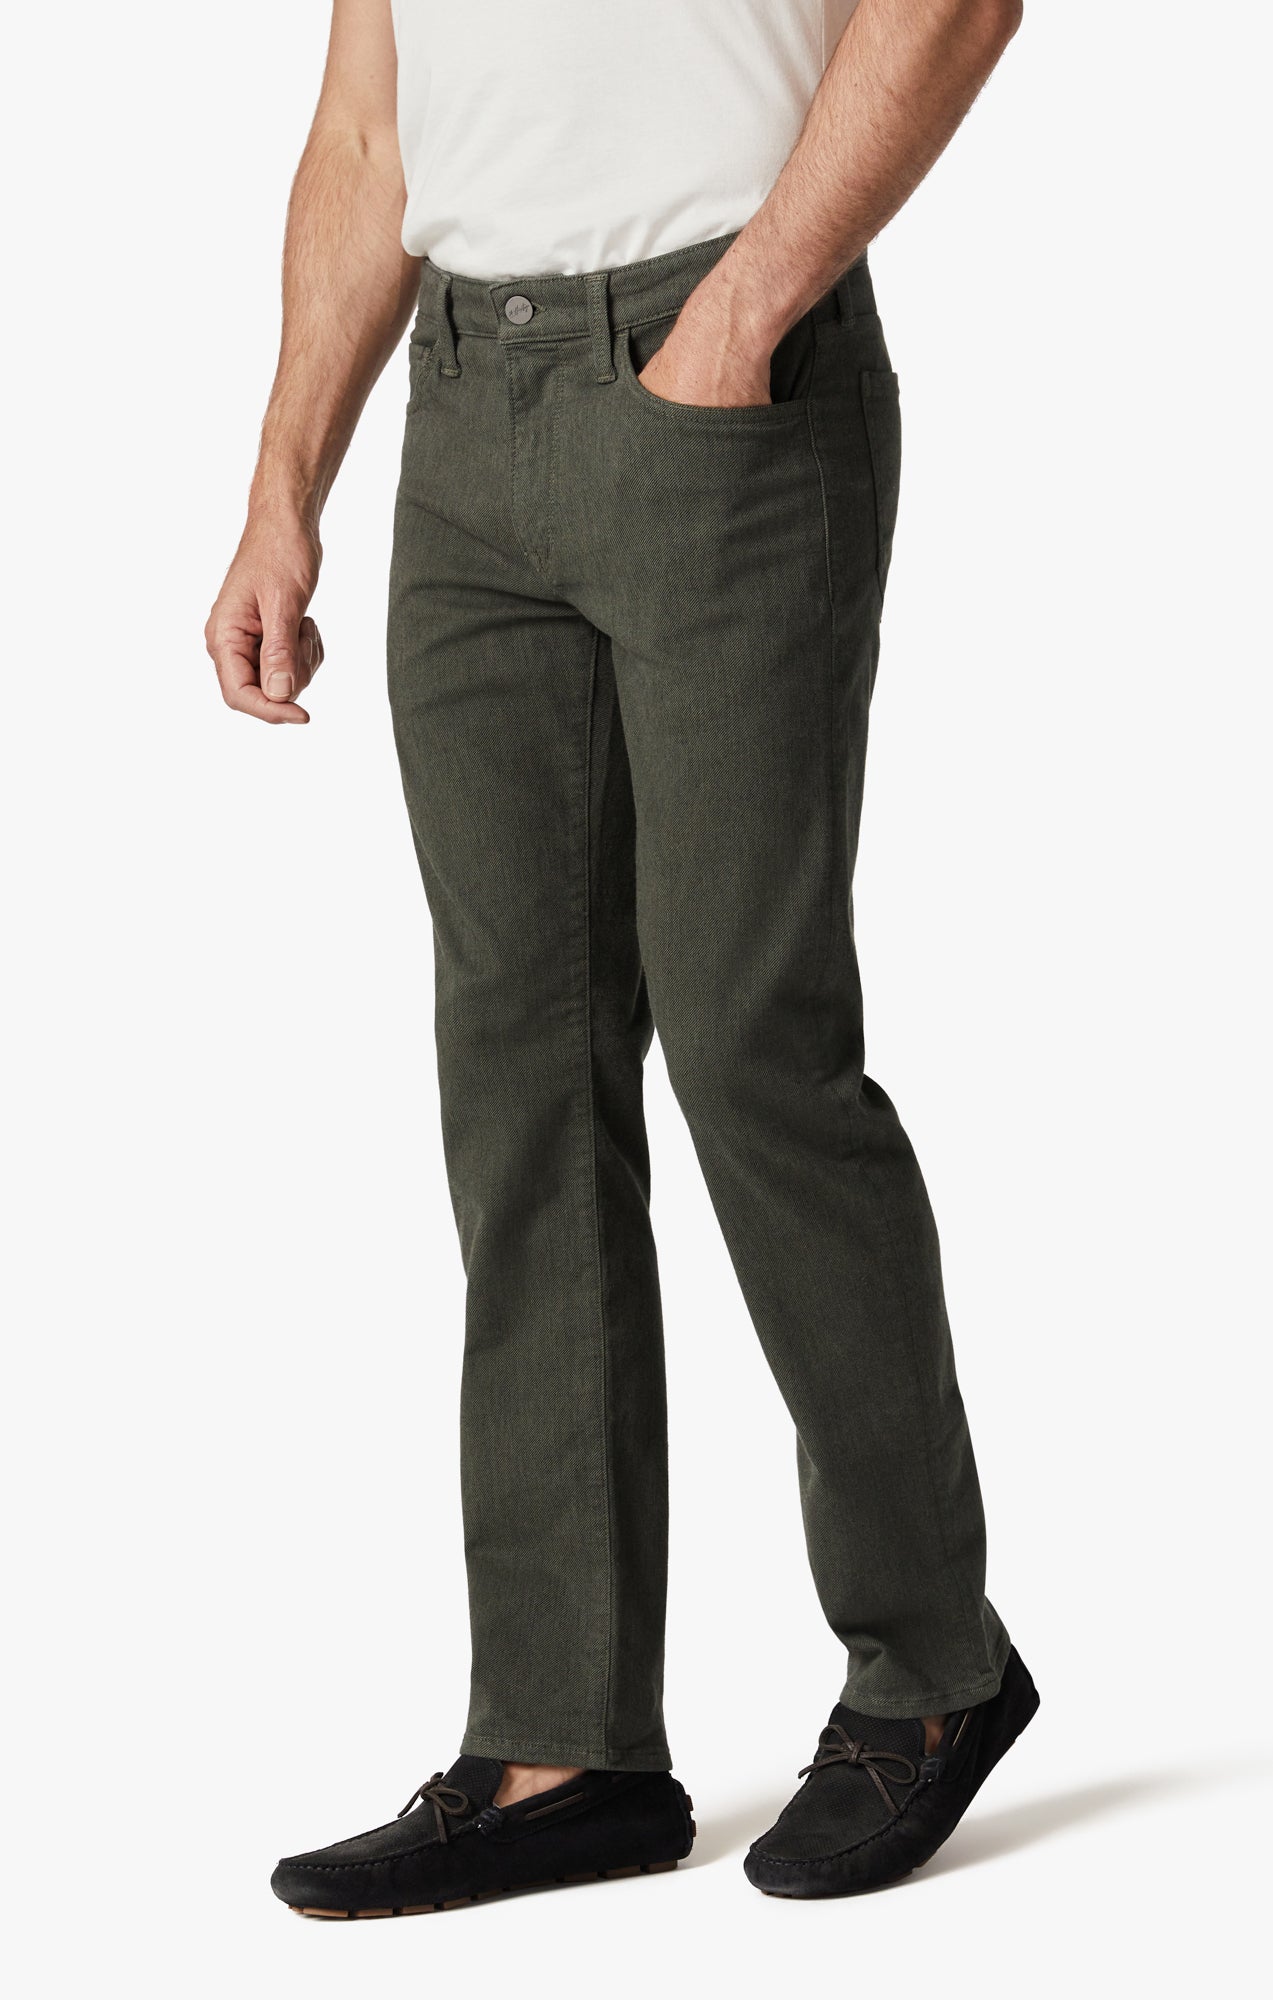 Courage Straight Leg Pants in Forest Diagonal